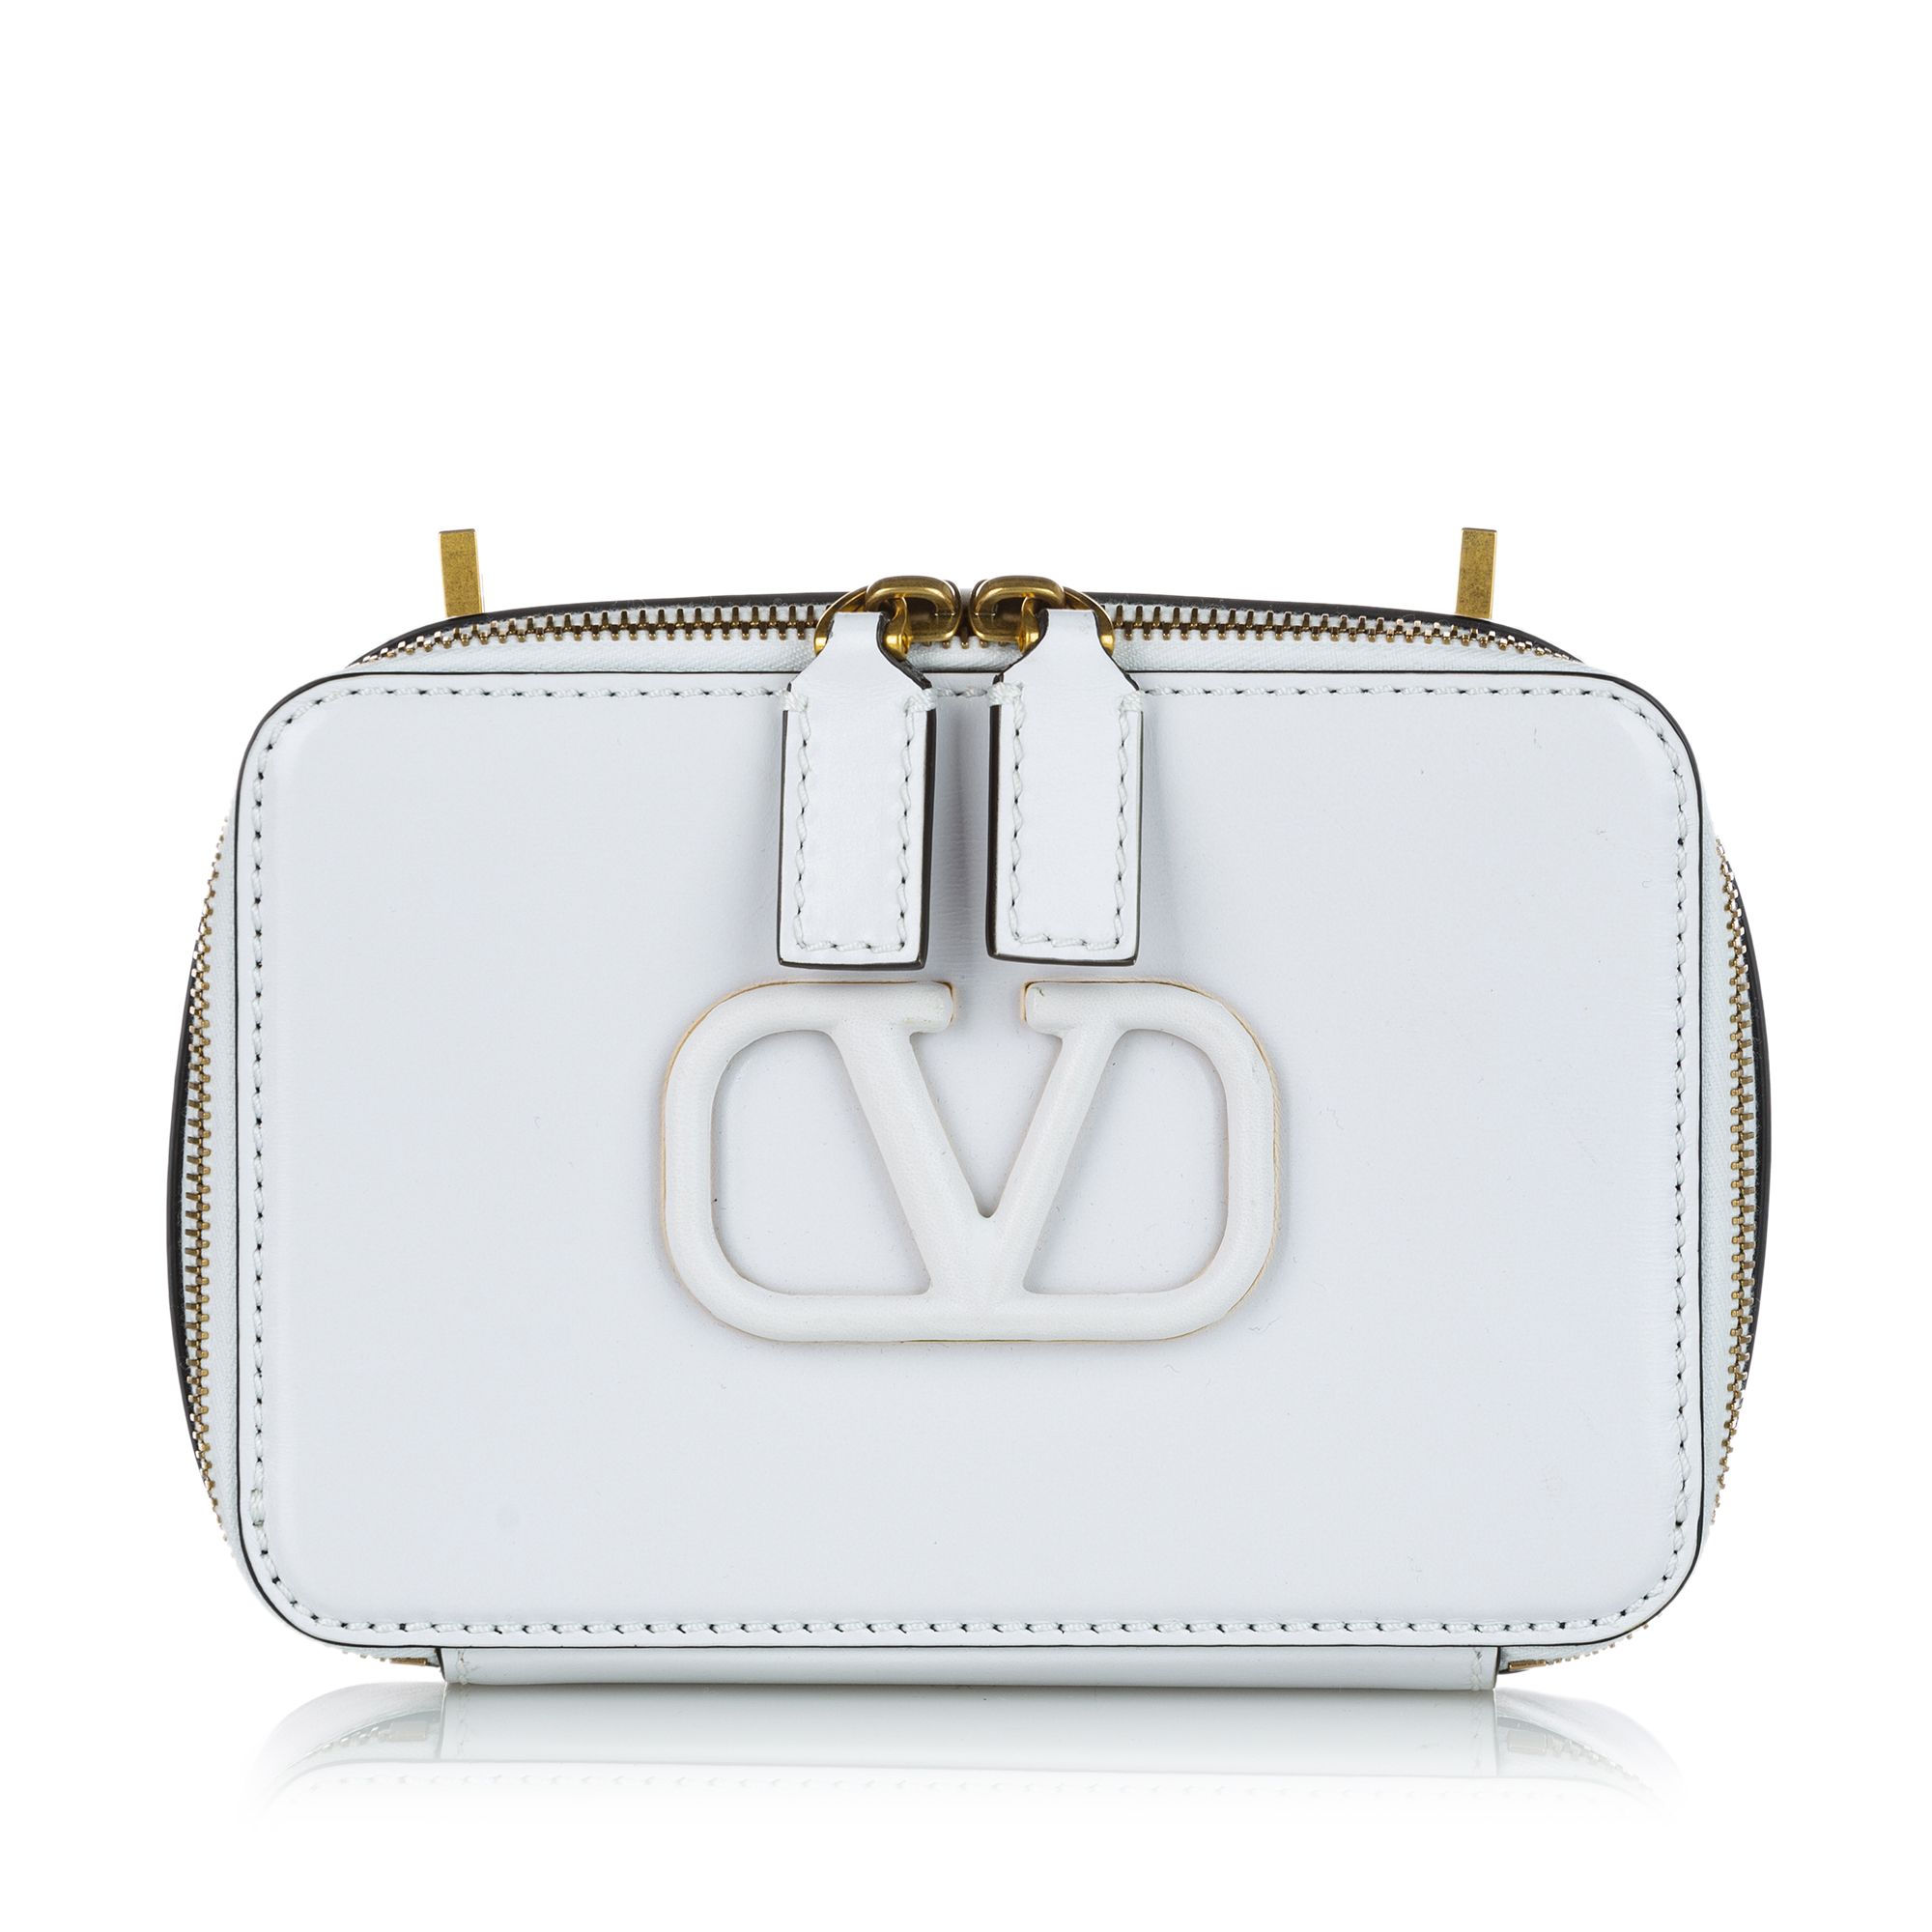 VINTAGE. RRP AS NEW. The VSling crossbody bag features a leather body, a flat leather strap, and a zip around closure .Exterior Front Cracked, Scratched. 

Dimensions:
Length 12cm
Width 18cm
Depth 6cm
Shoulder Drop 55cm

Original Accessories: Dust Bag, Authenticity Card

Color: White x Ivory
Material: Leather x Calf
Country of Origin: Italy
Boutique Reference: SSU115348K1342


Product Rating: GoodCondition